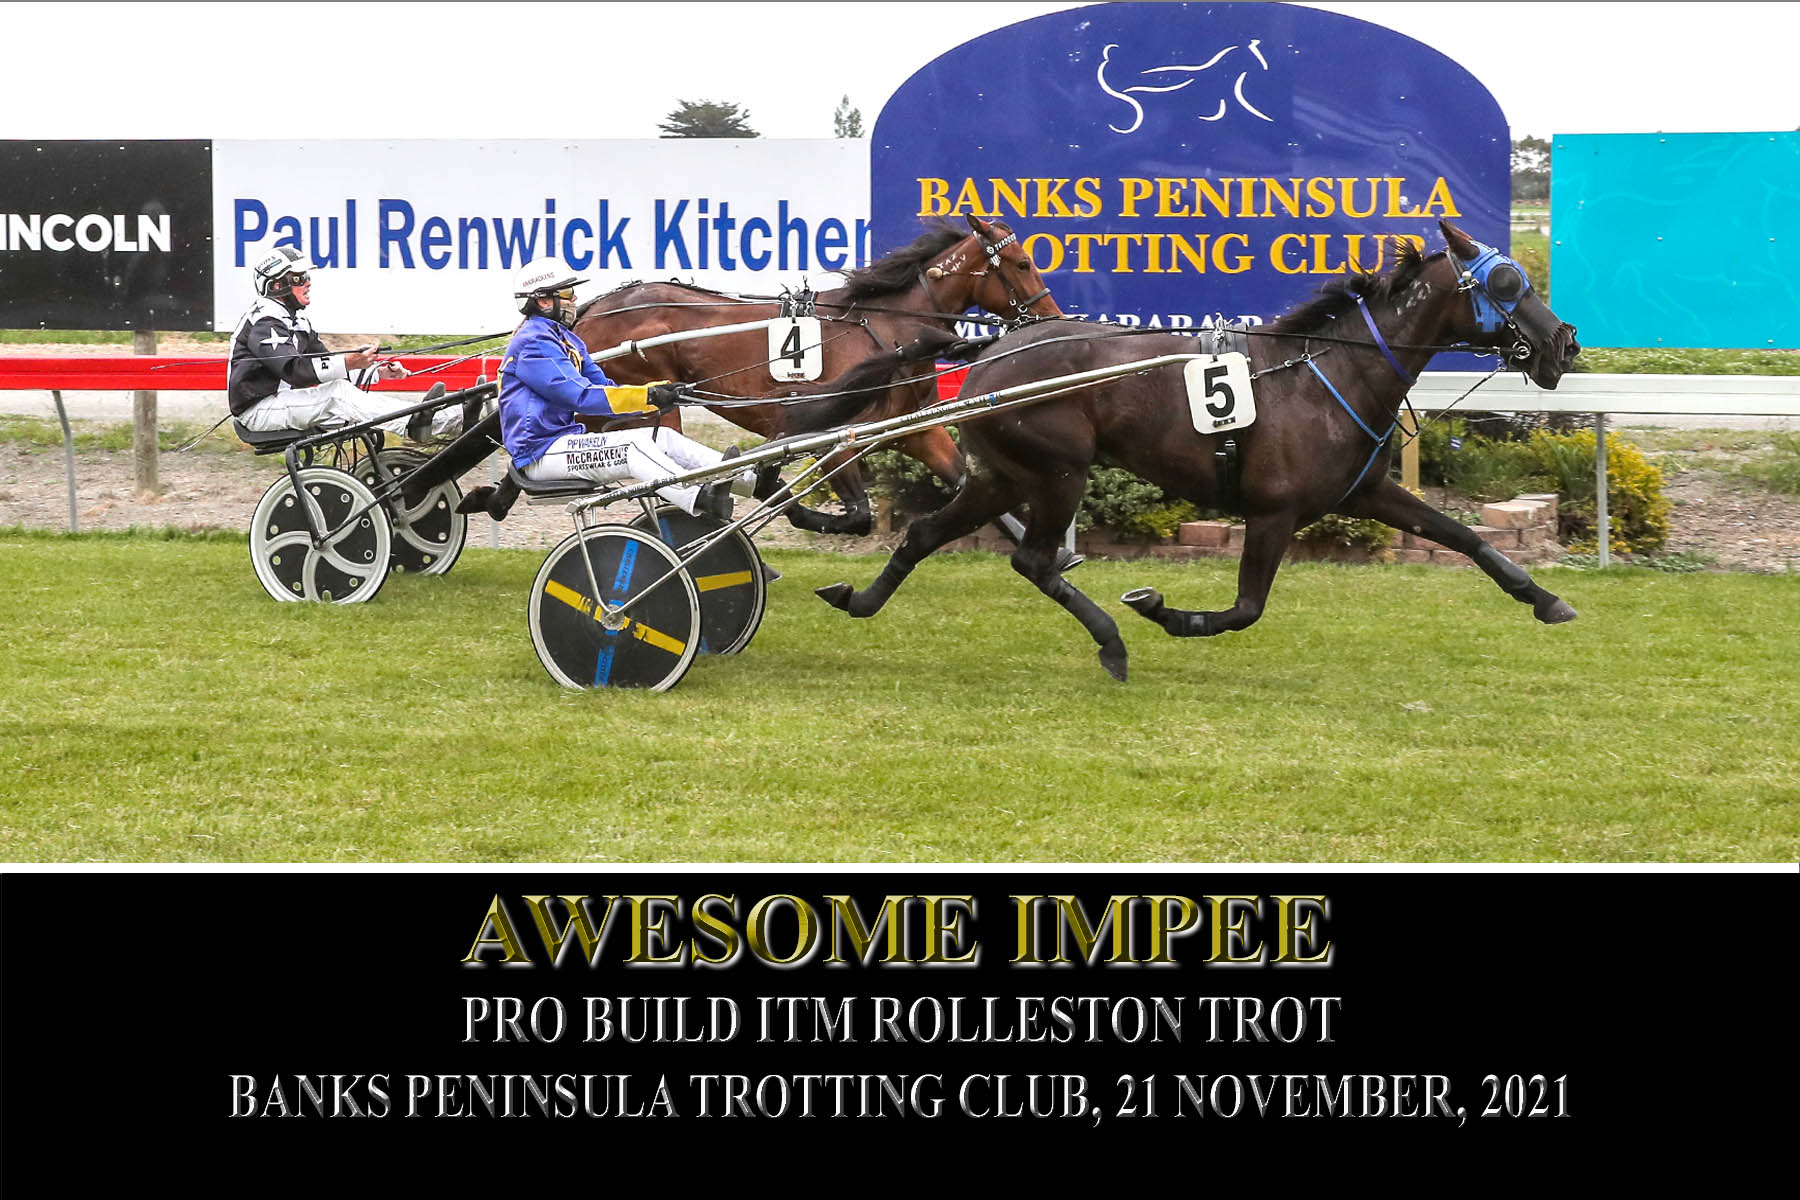 Race 1 Awesome Impee